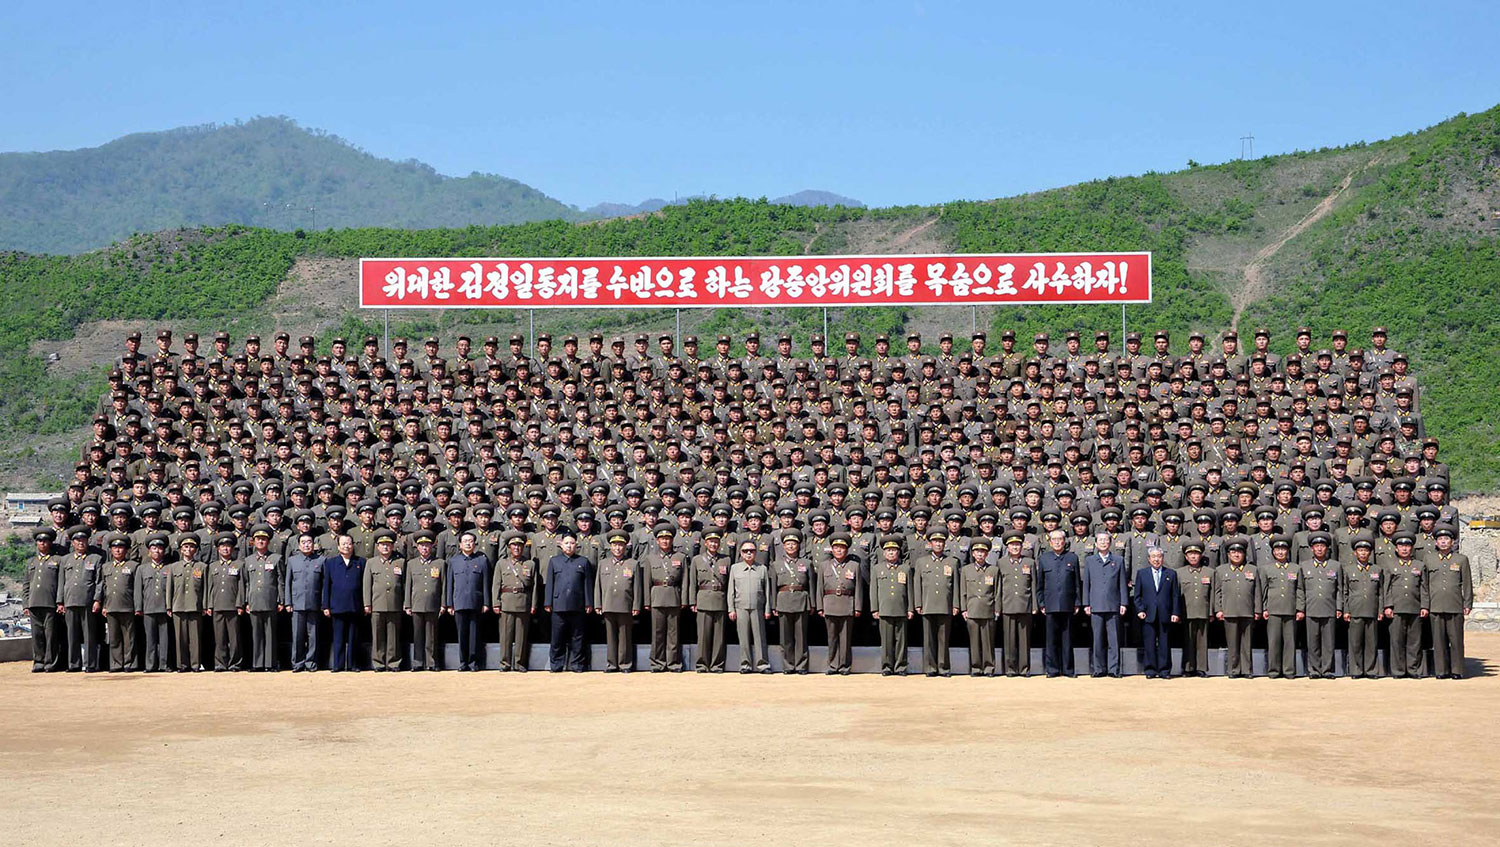 In this undated photo, released by KCNA on May 28, 2011, Kim Jong Il (center, in sunglasses) and his son Kim Jong Un (four places to his left) pose with military personnel working at the construction site of the Huichon Power Station in Jokang Do.